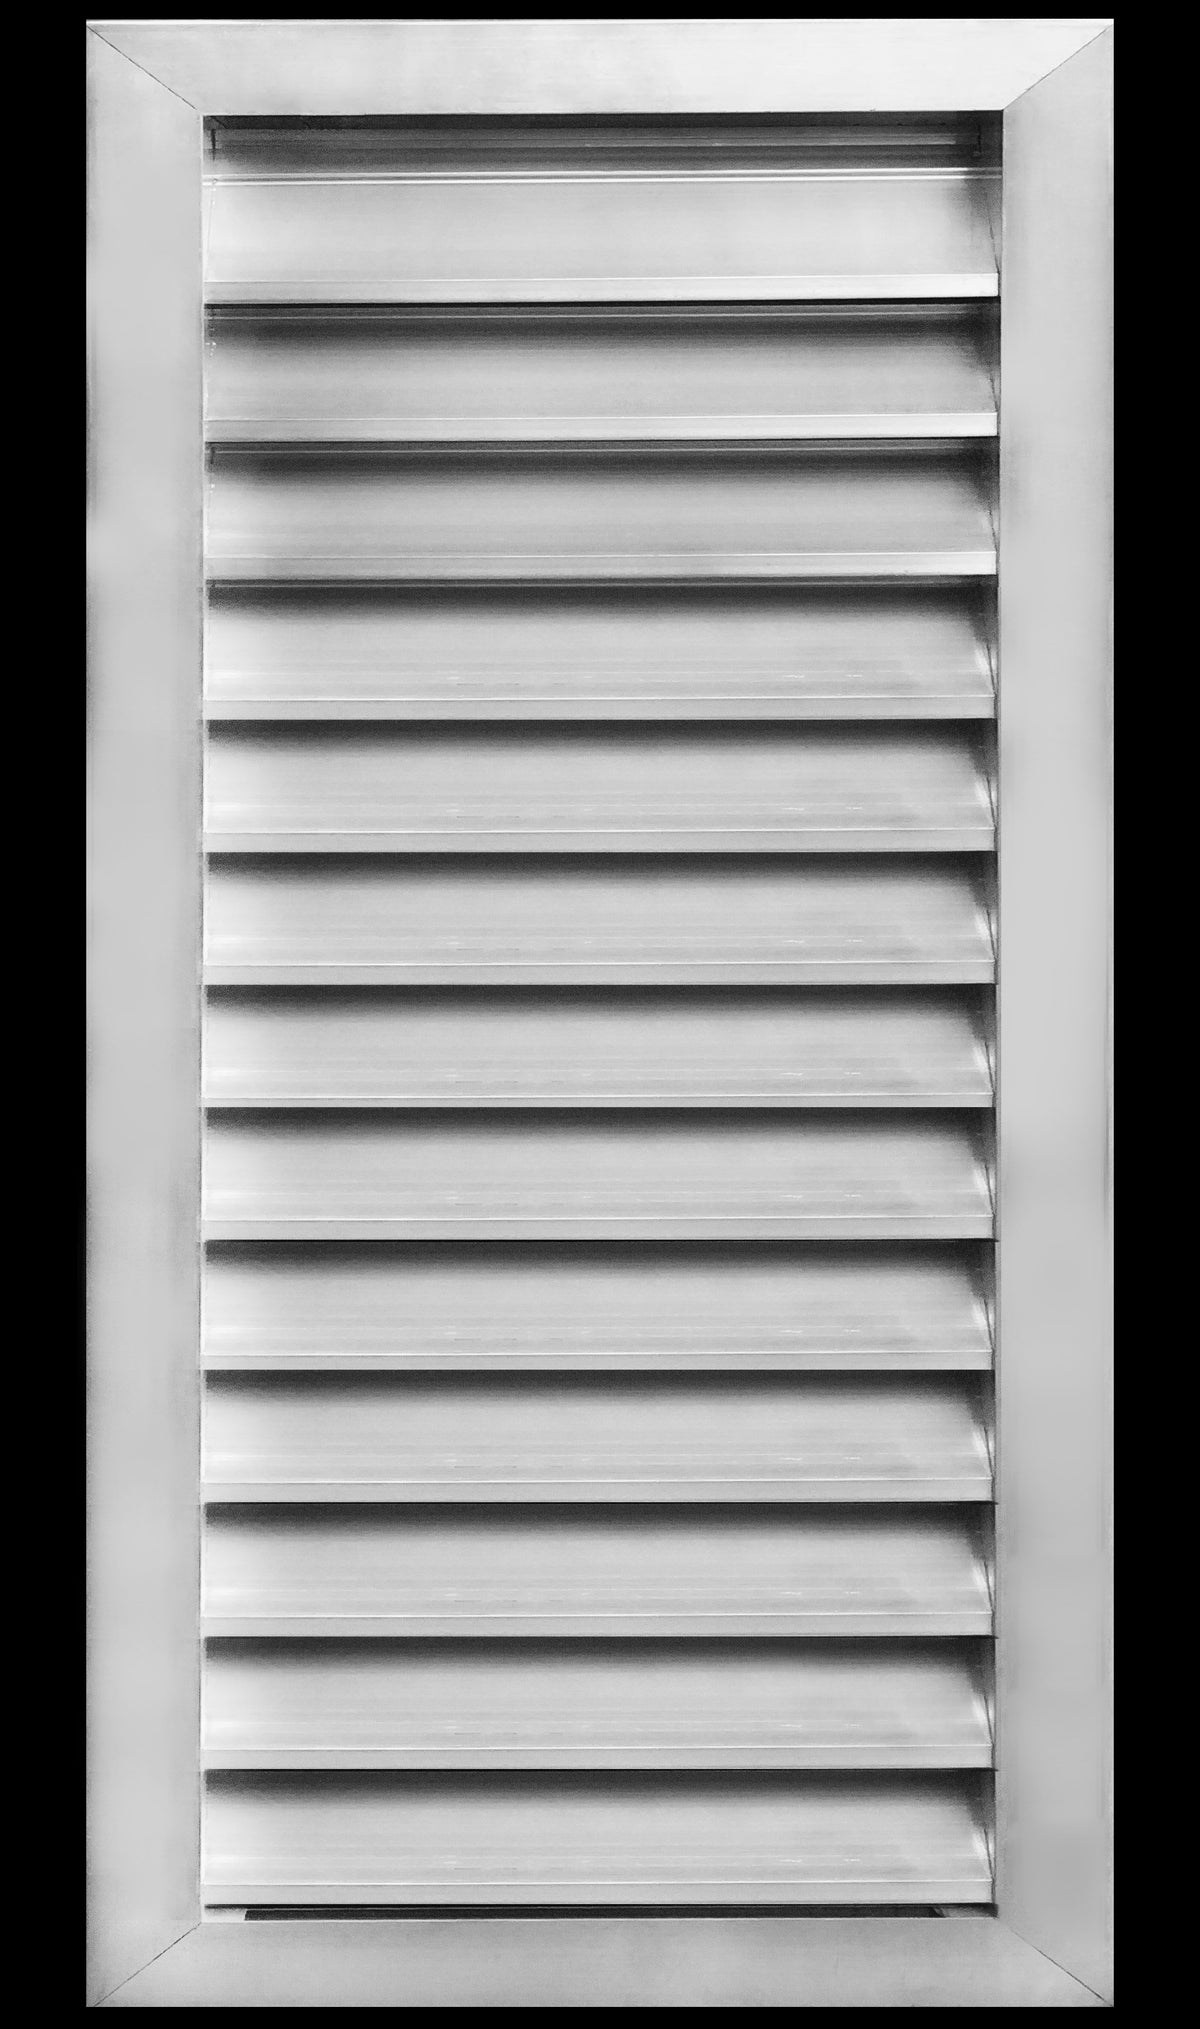 14&quot;w X 30&quot;h Aluminum Outdoor Weather Proof Louvers - Rain &amp; Waterproof Air Vent With Screen Mesh